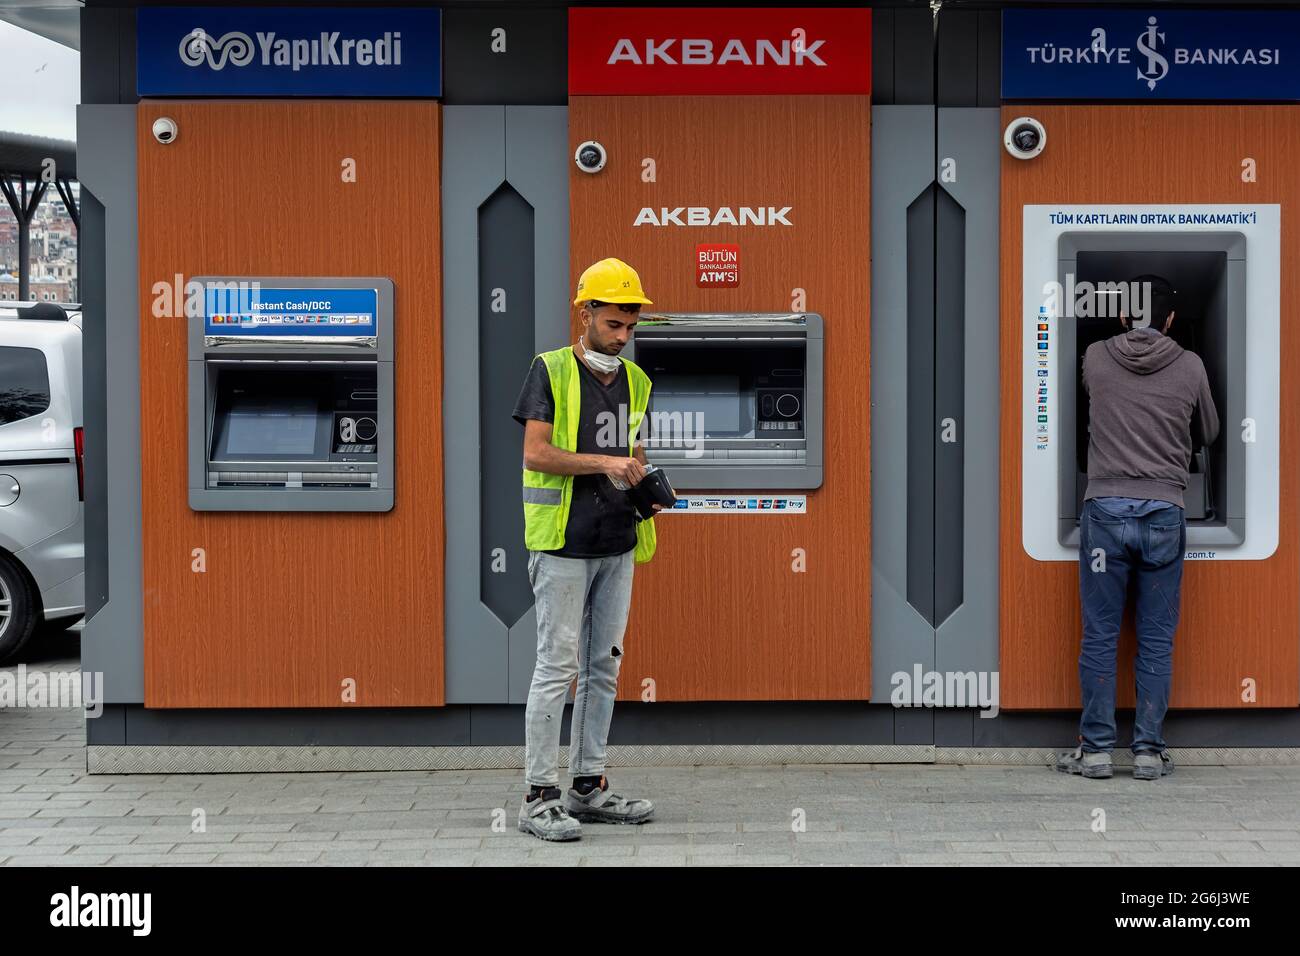 Construction worker in front of Yapikredi, Akbank, Isbank bank ATM s, after withdrawing monthly paycheck. Karakoy, Istanbul - Turkey. Stock Photo